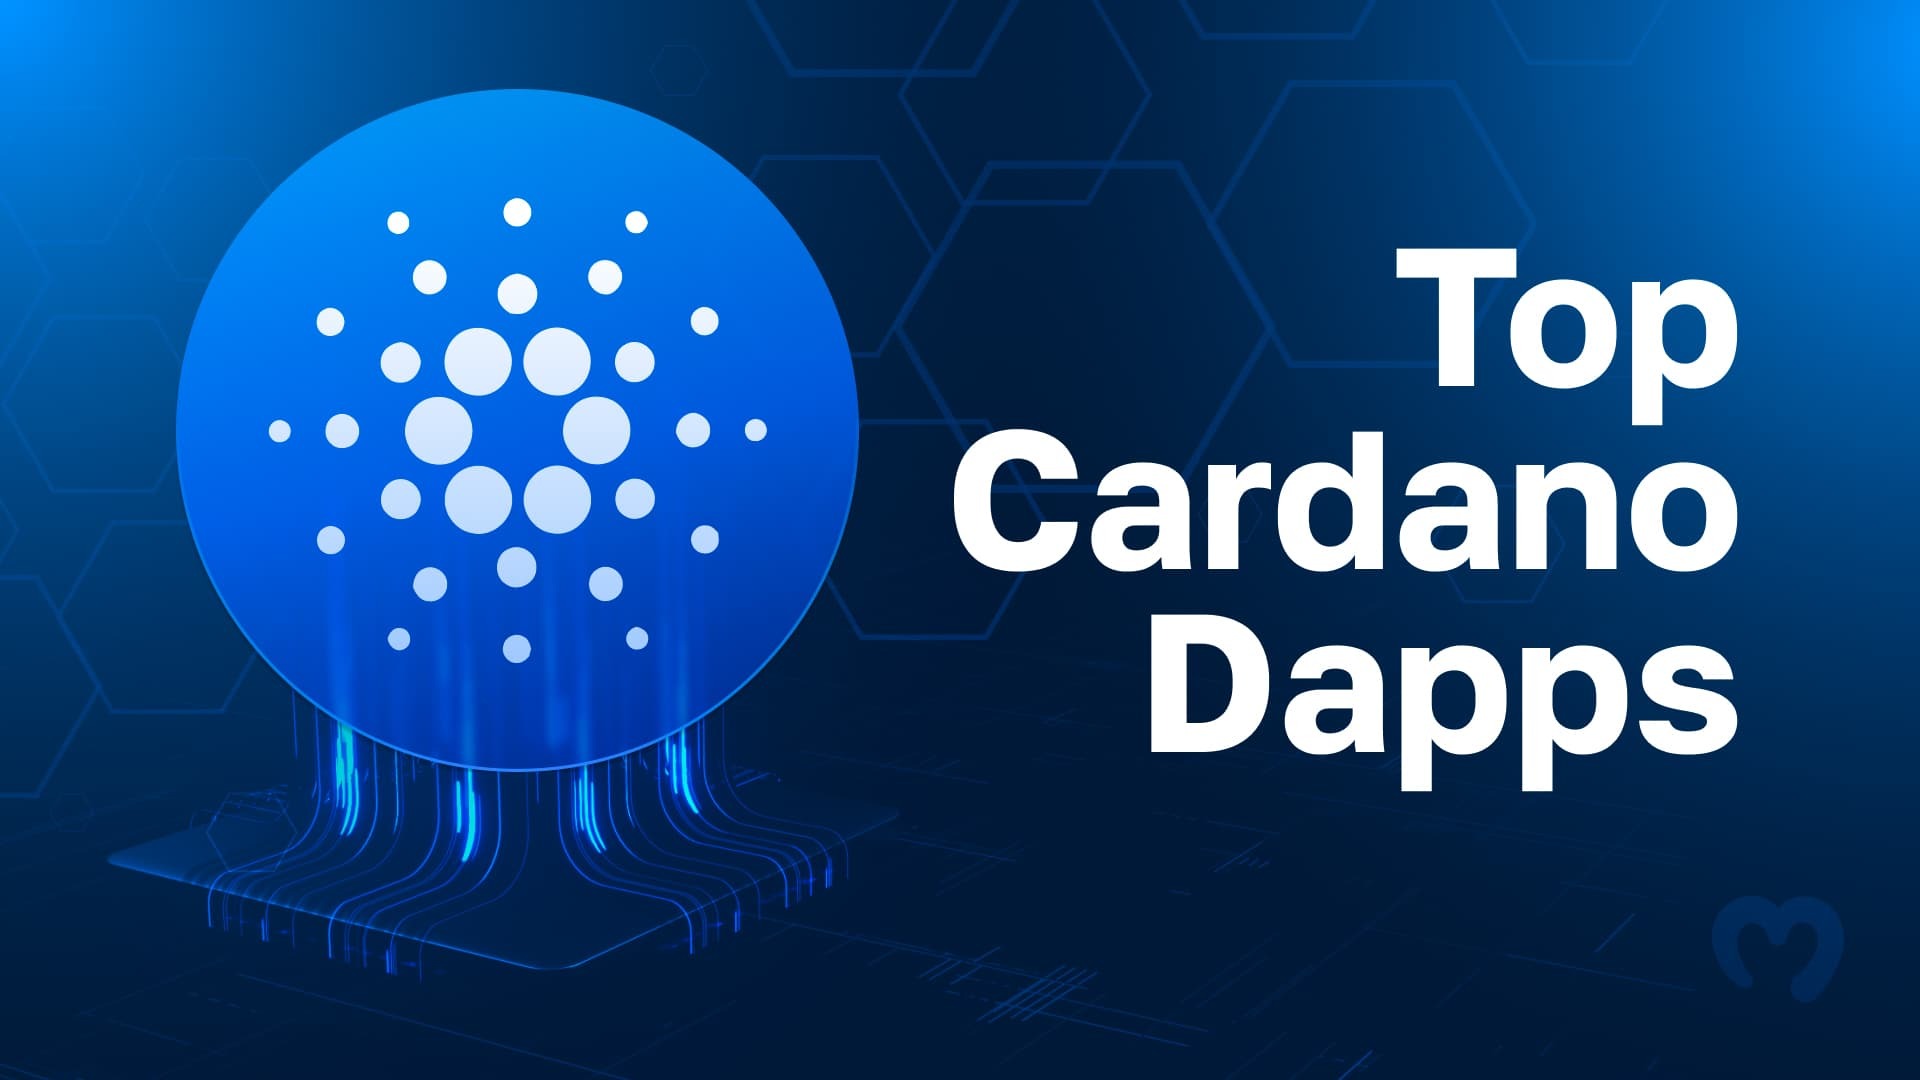 Top Cardano Projects in Best Cardano DApps